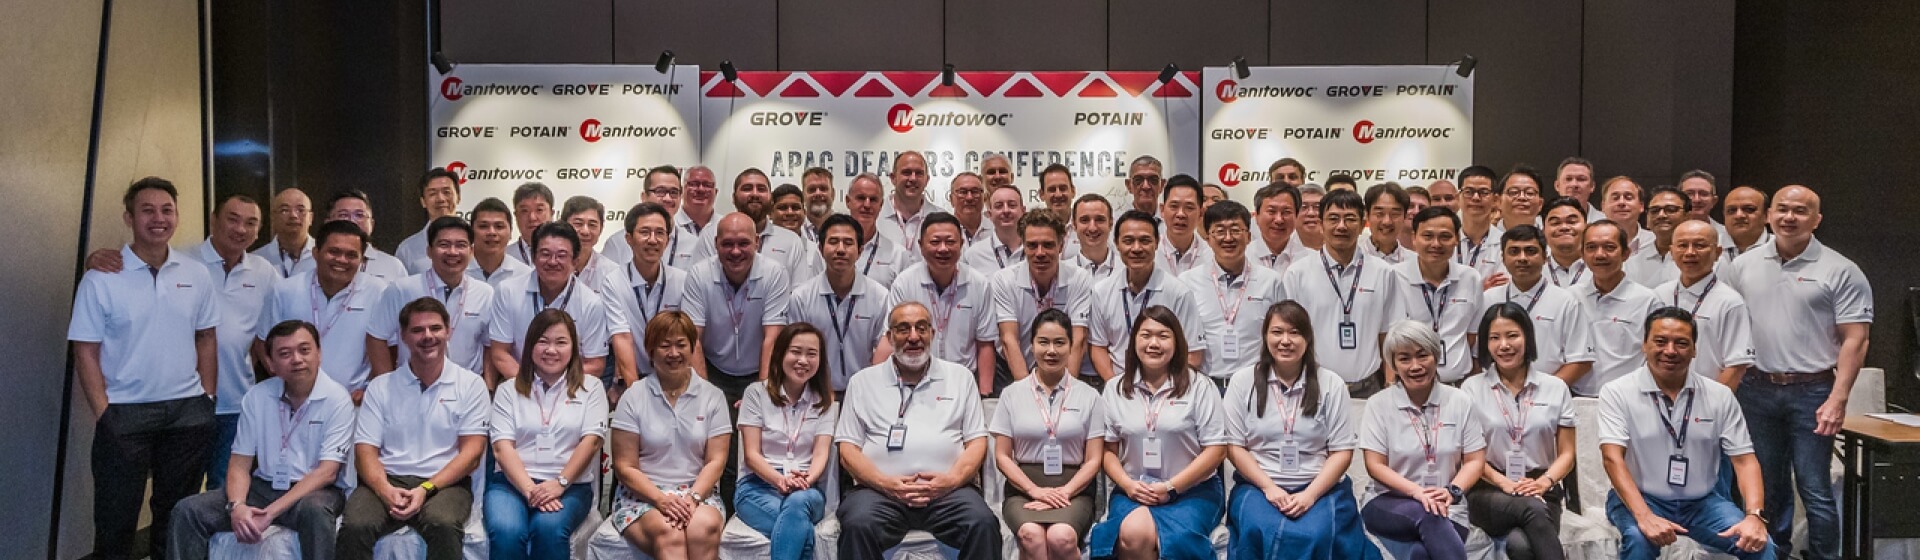 MTW-News-Manitowoc-dealers-gather-in-Singapore-1.jpg